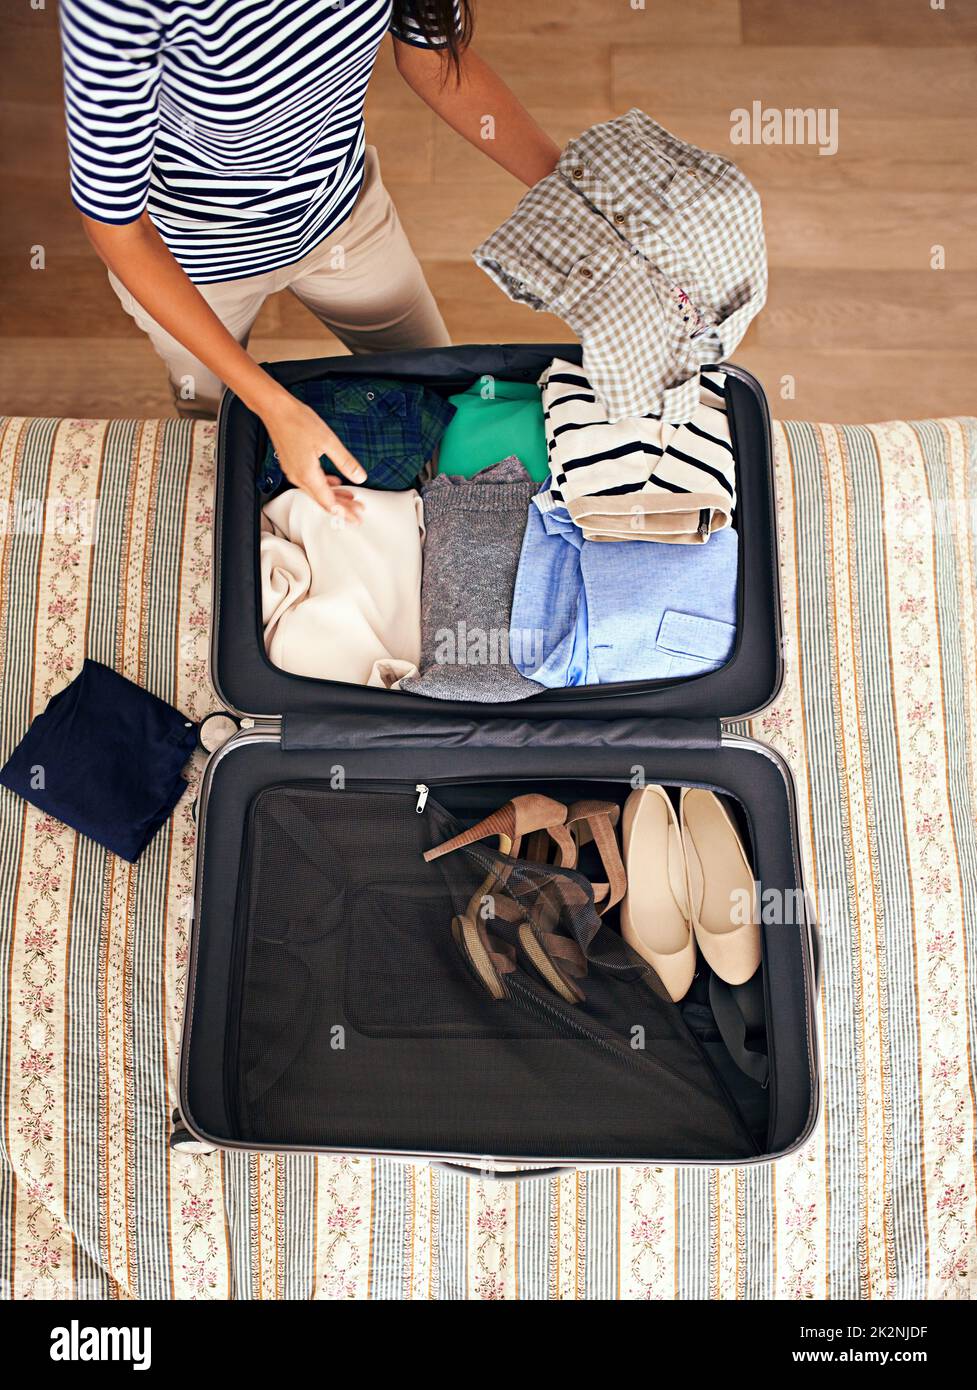 4,053 Woman Packing Her Bag Images, Stock Photos, 3D objects